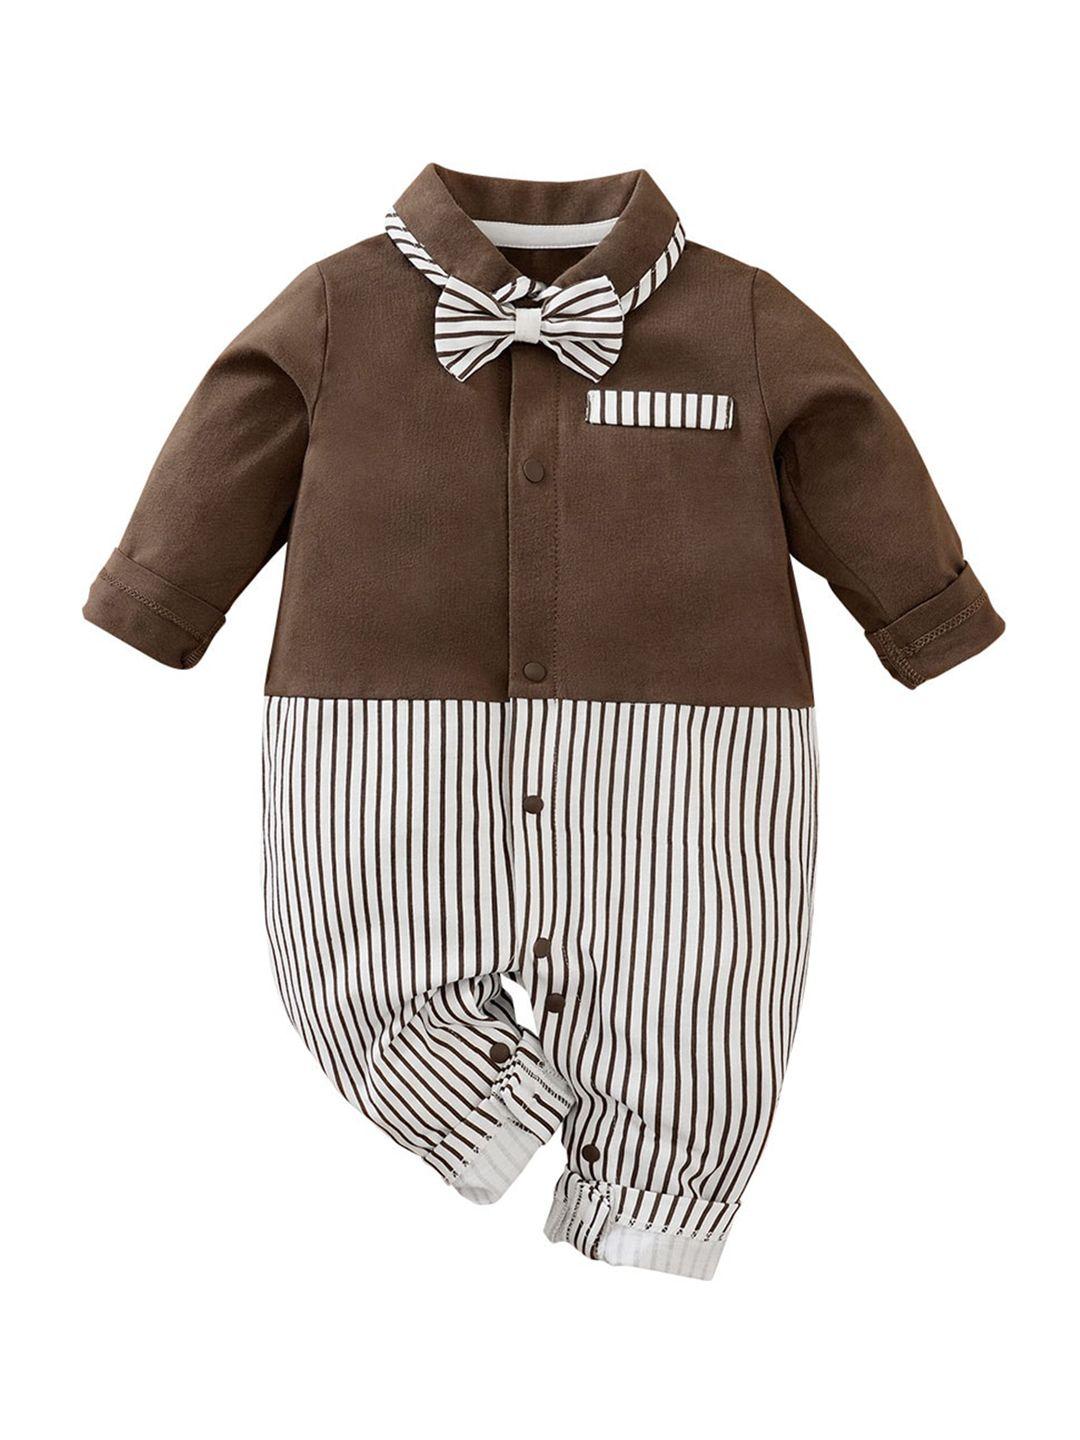 stylecast-boys-striped-cotton-rompers